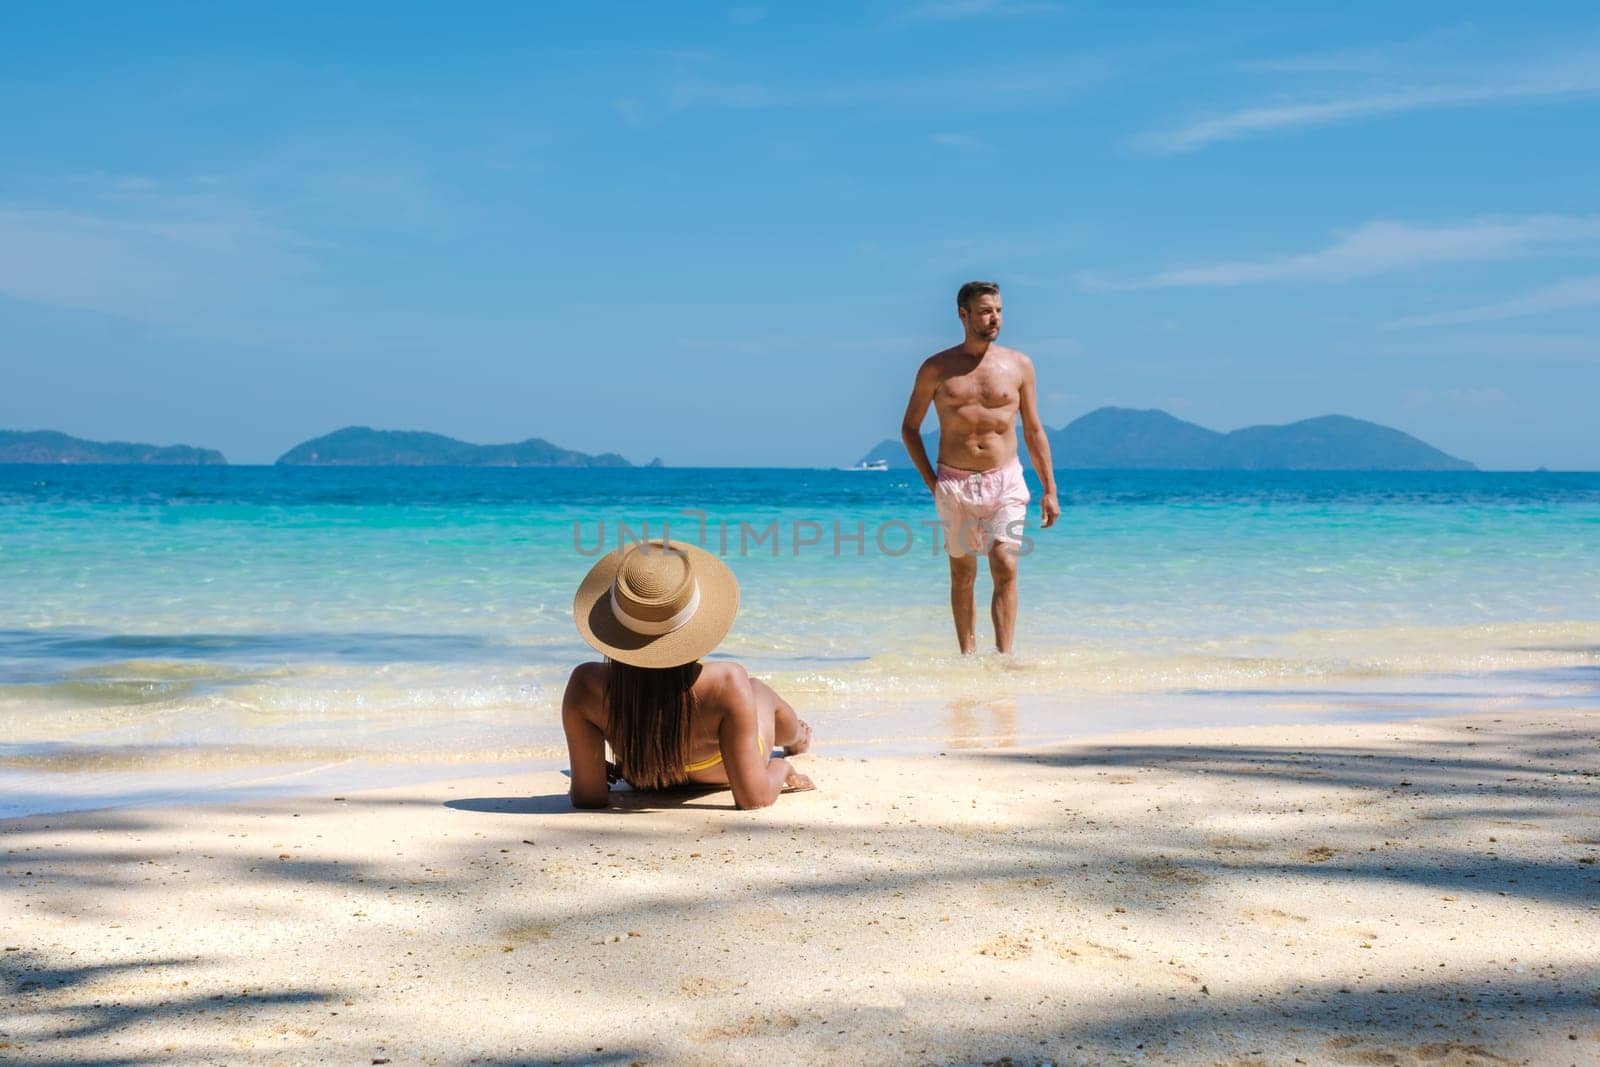 Koh Wai Island Trat Thailand near Koh Chang Trat. A young couple of men and women on a tropical beach during a luxury vacation in Thailand relaxing on the beach with turqouse colored ocean